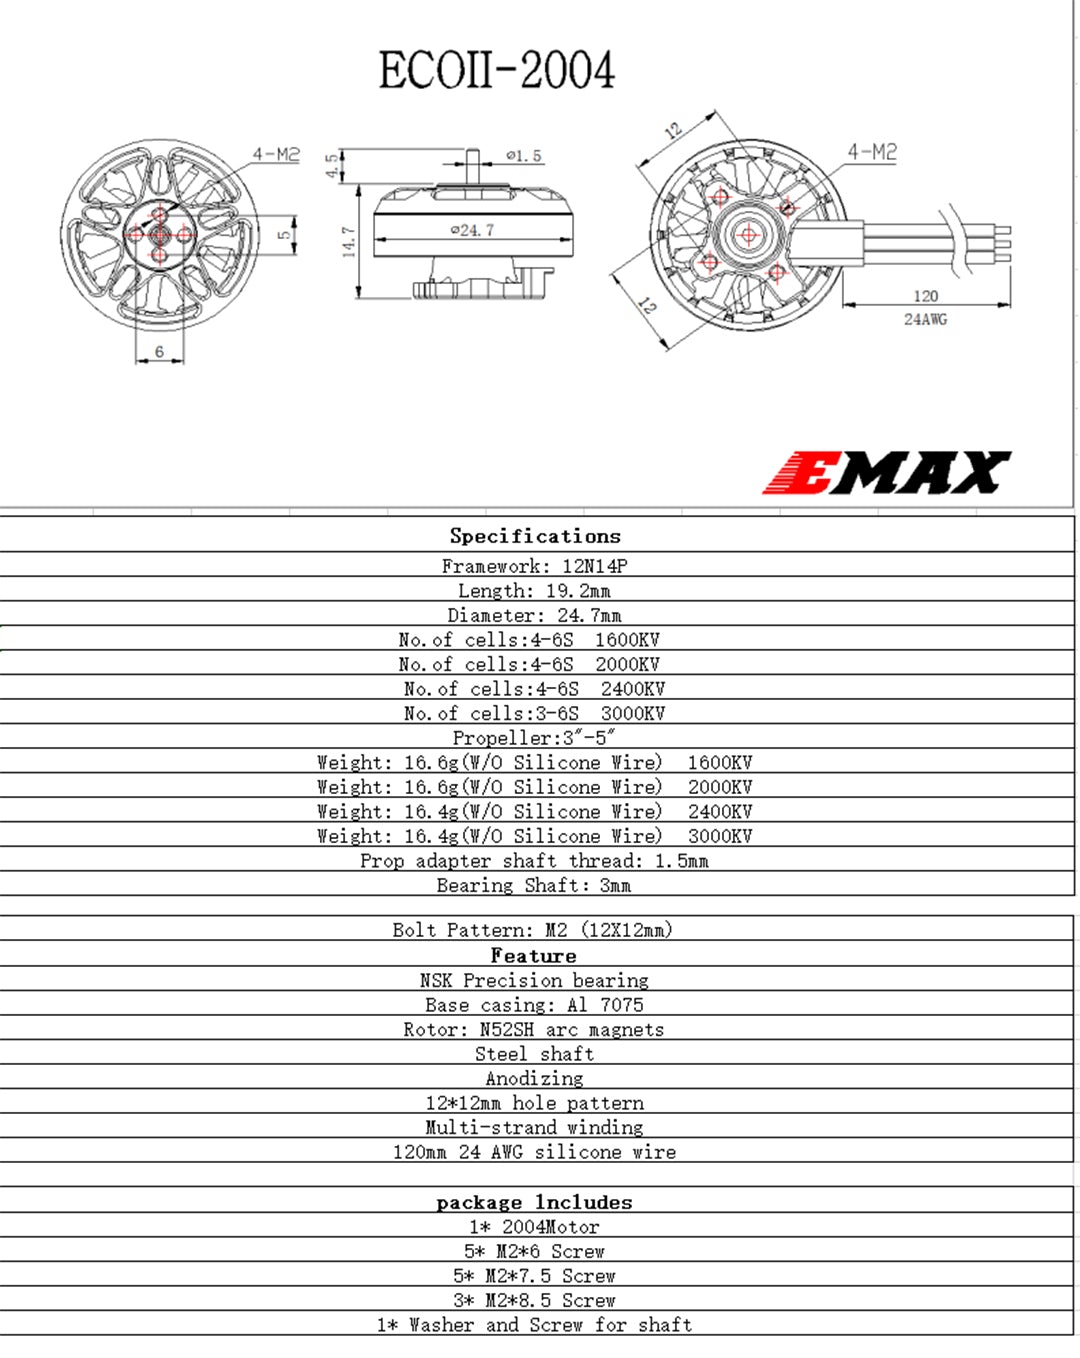 EMAX ECO II 2004 Brushless Motor Specifications and Dimensions